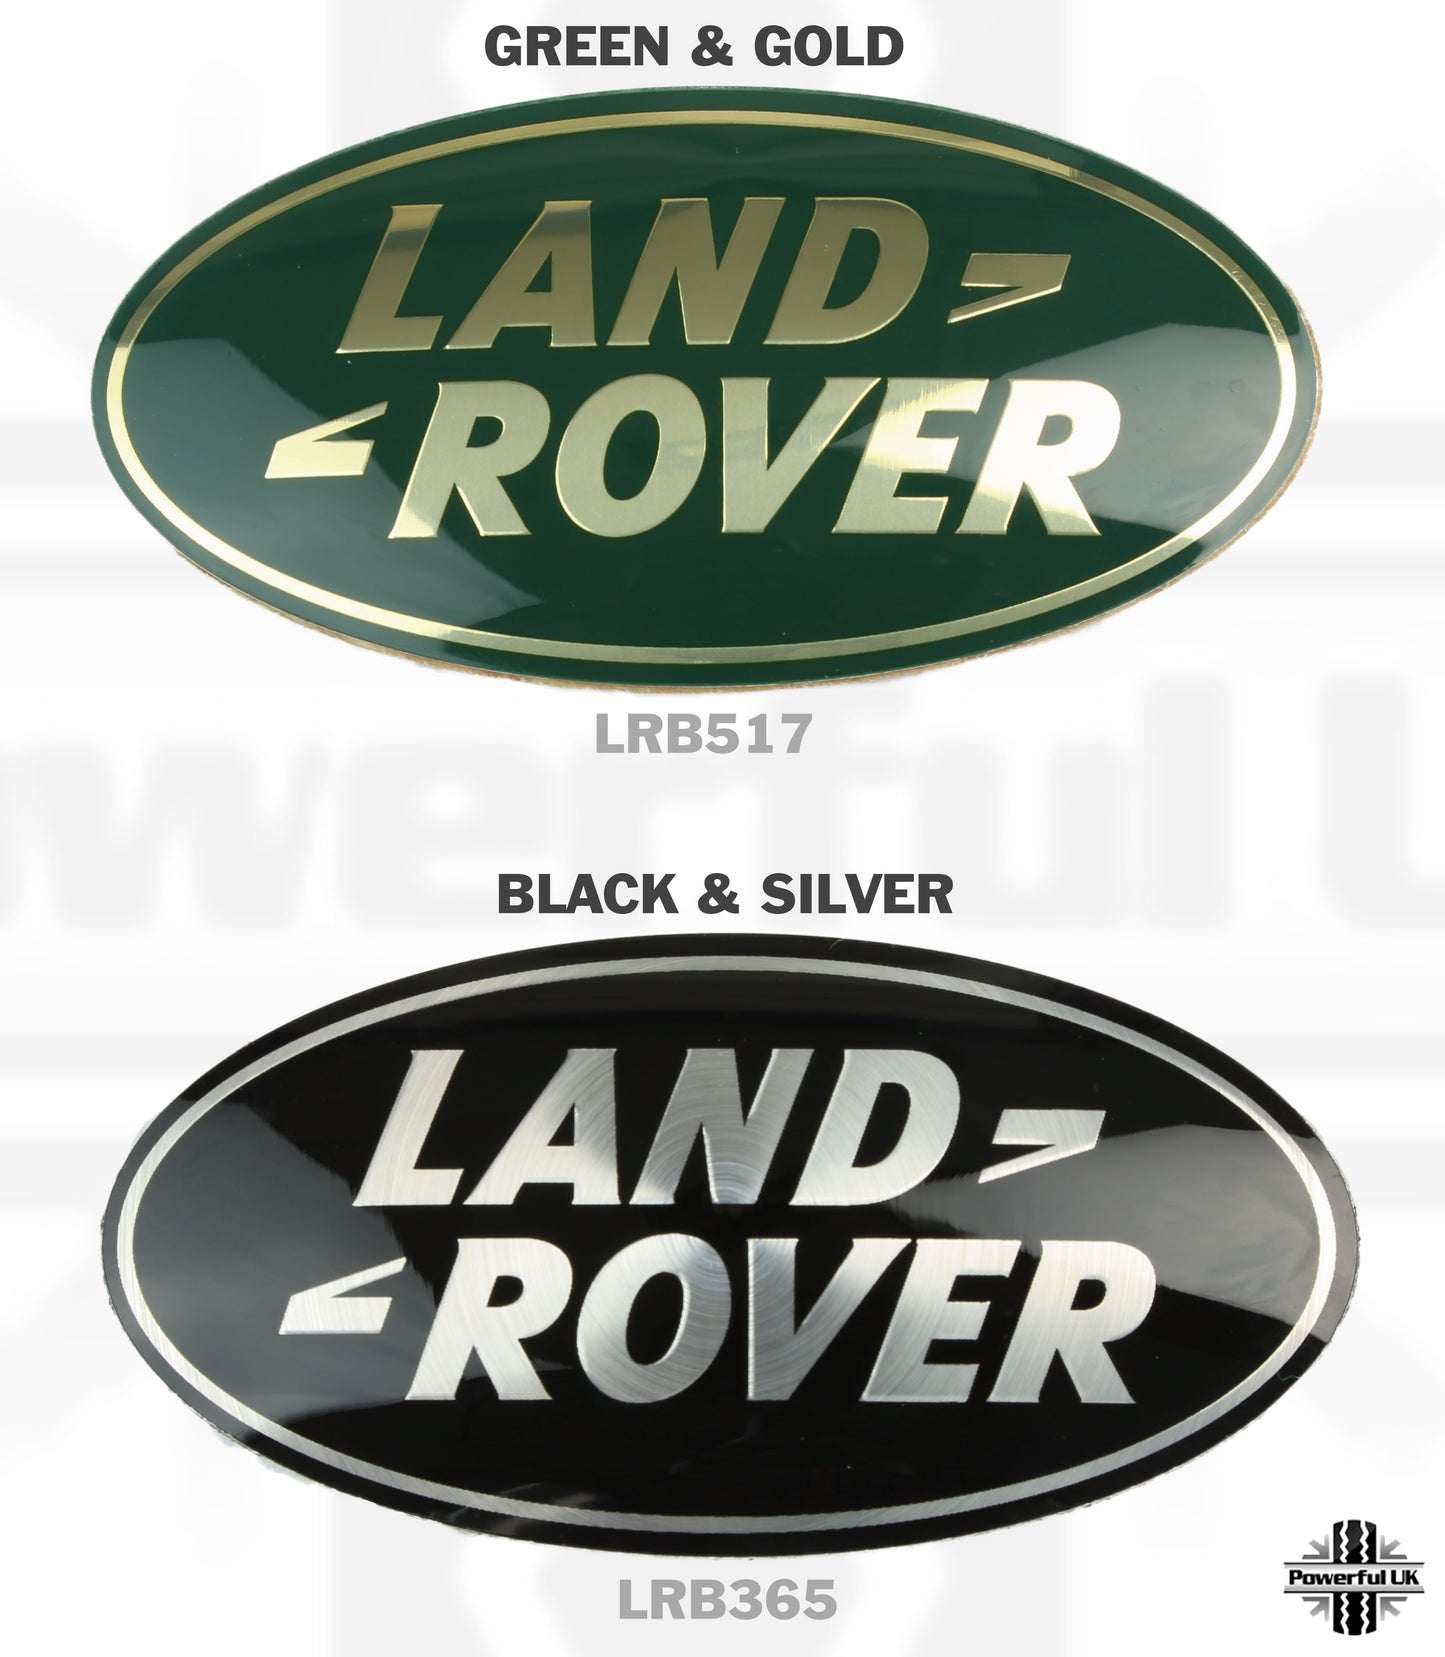 Genuine Rear Door Badge - Black & Silver - for Land Rover Discovery 3